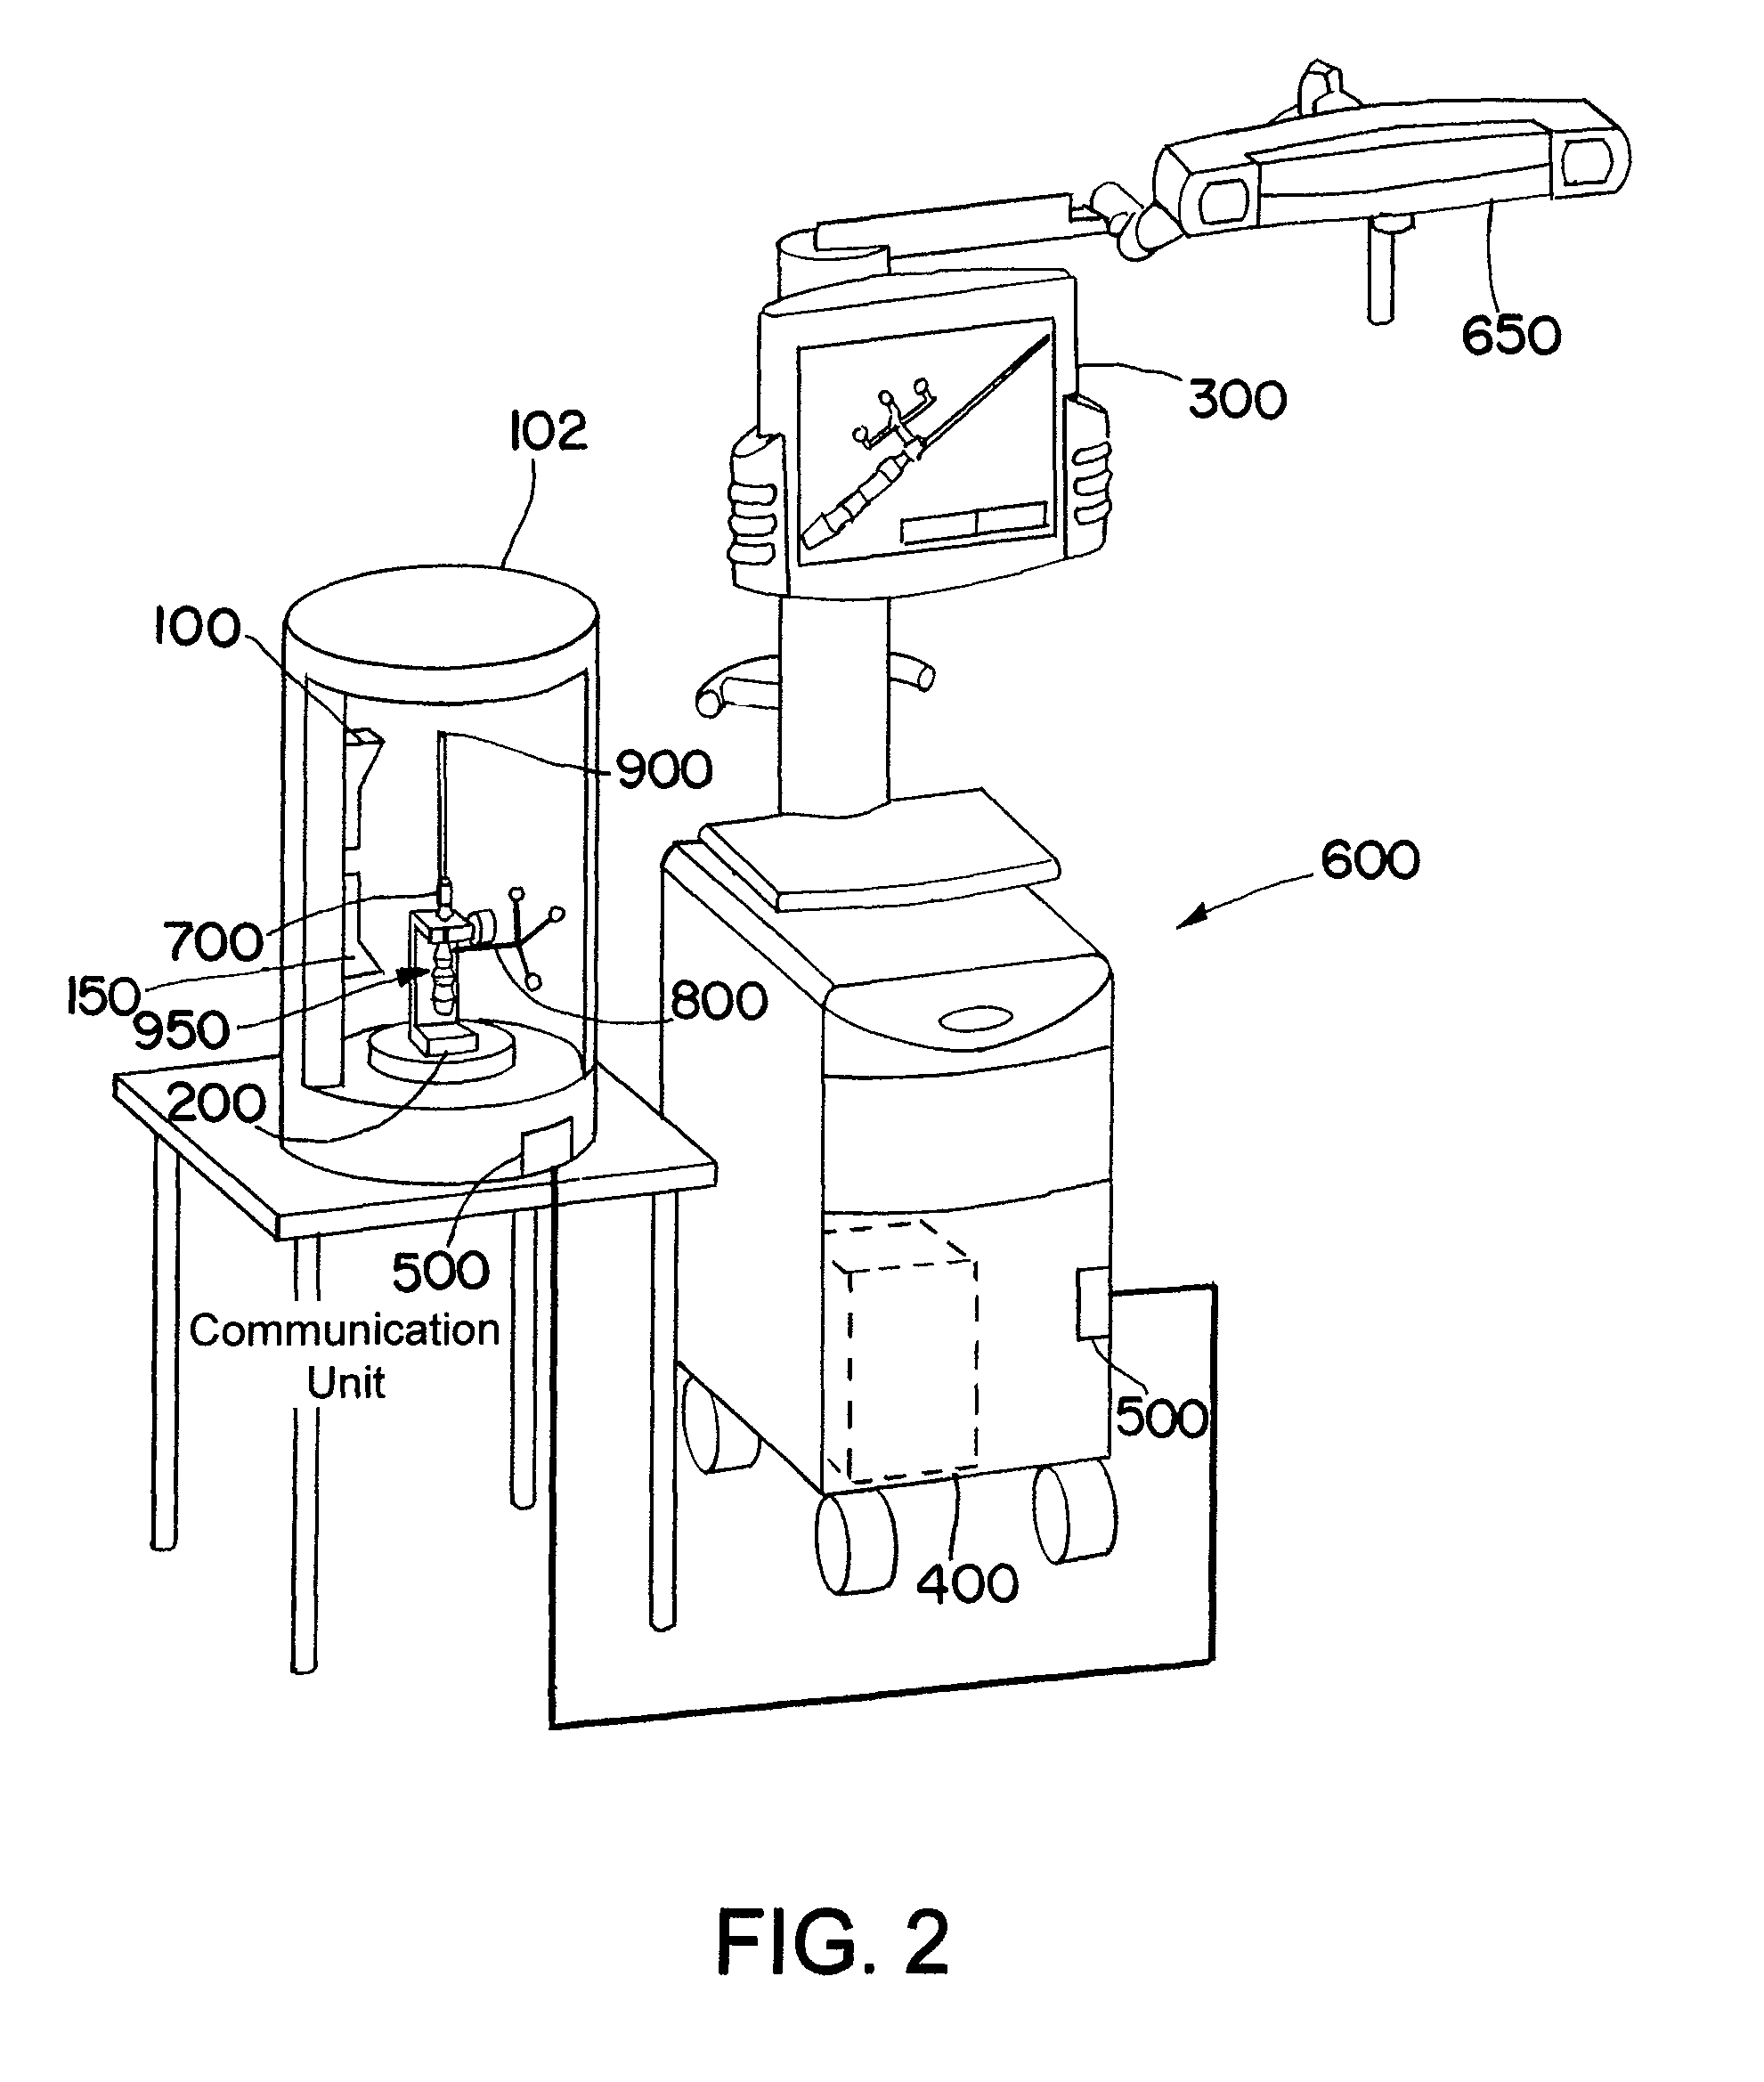 Geometrical properties measuring device for a medical treatment device including an RFID transponder